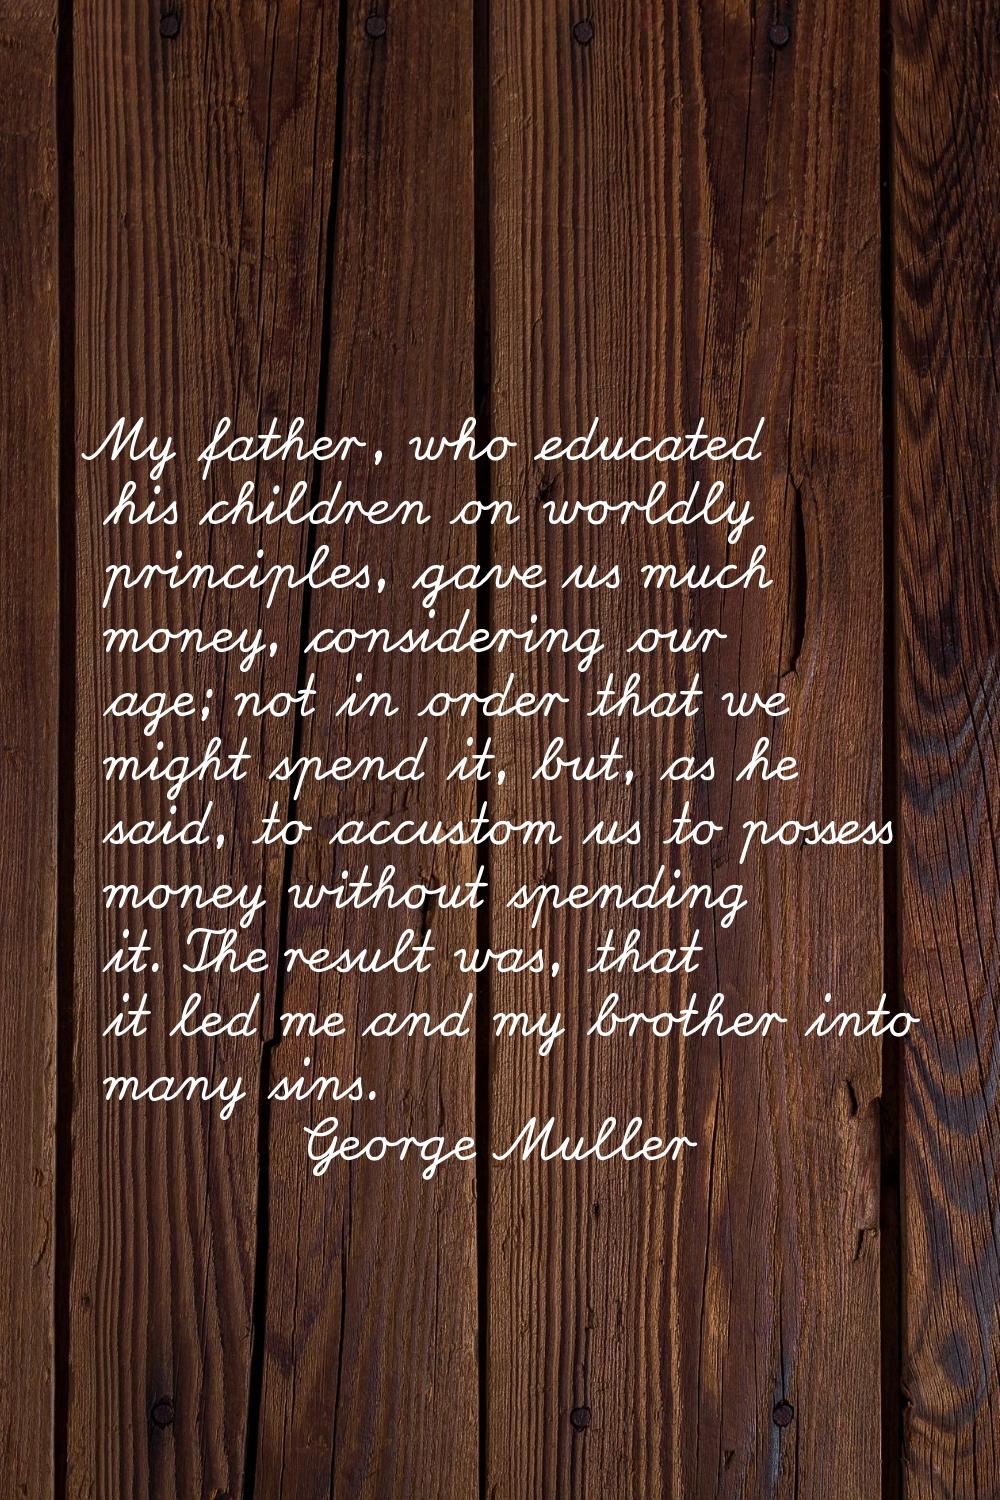 My father, who educated his children on worldly principles, gave us much money, considering our age